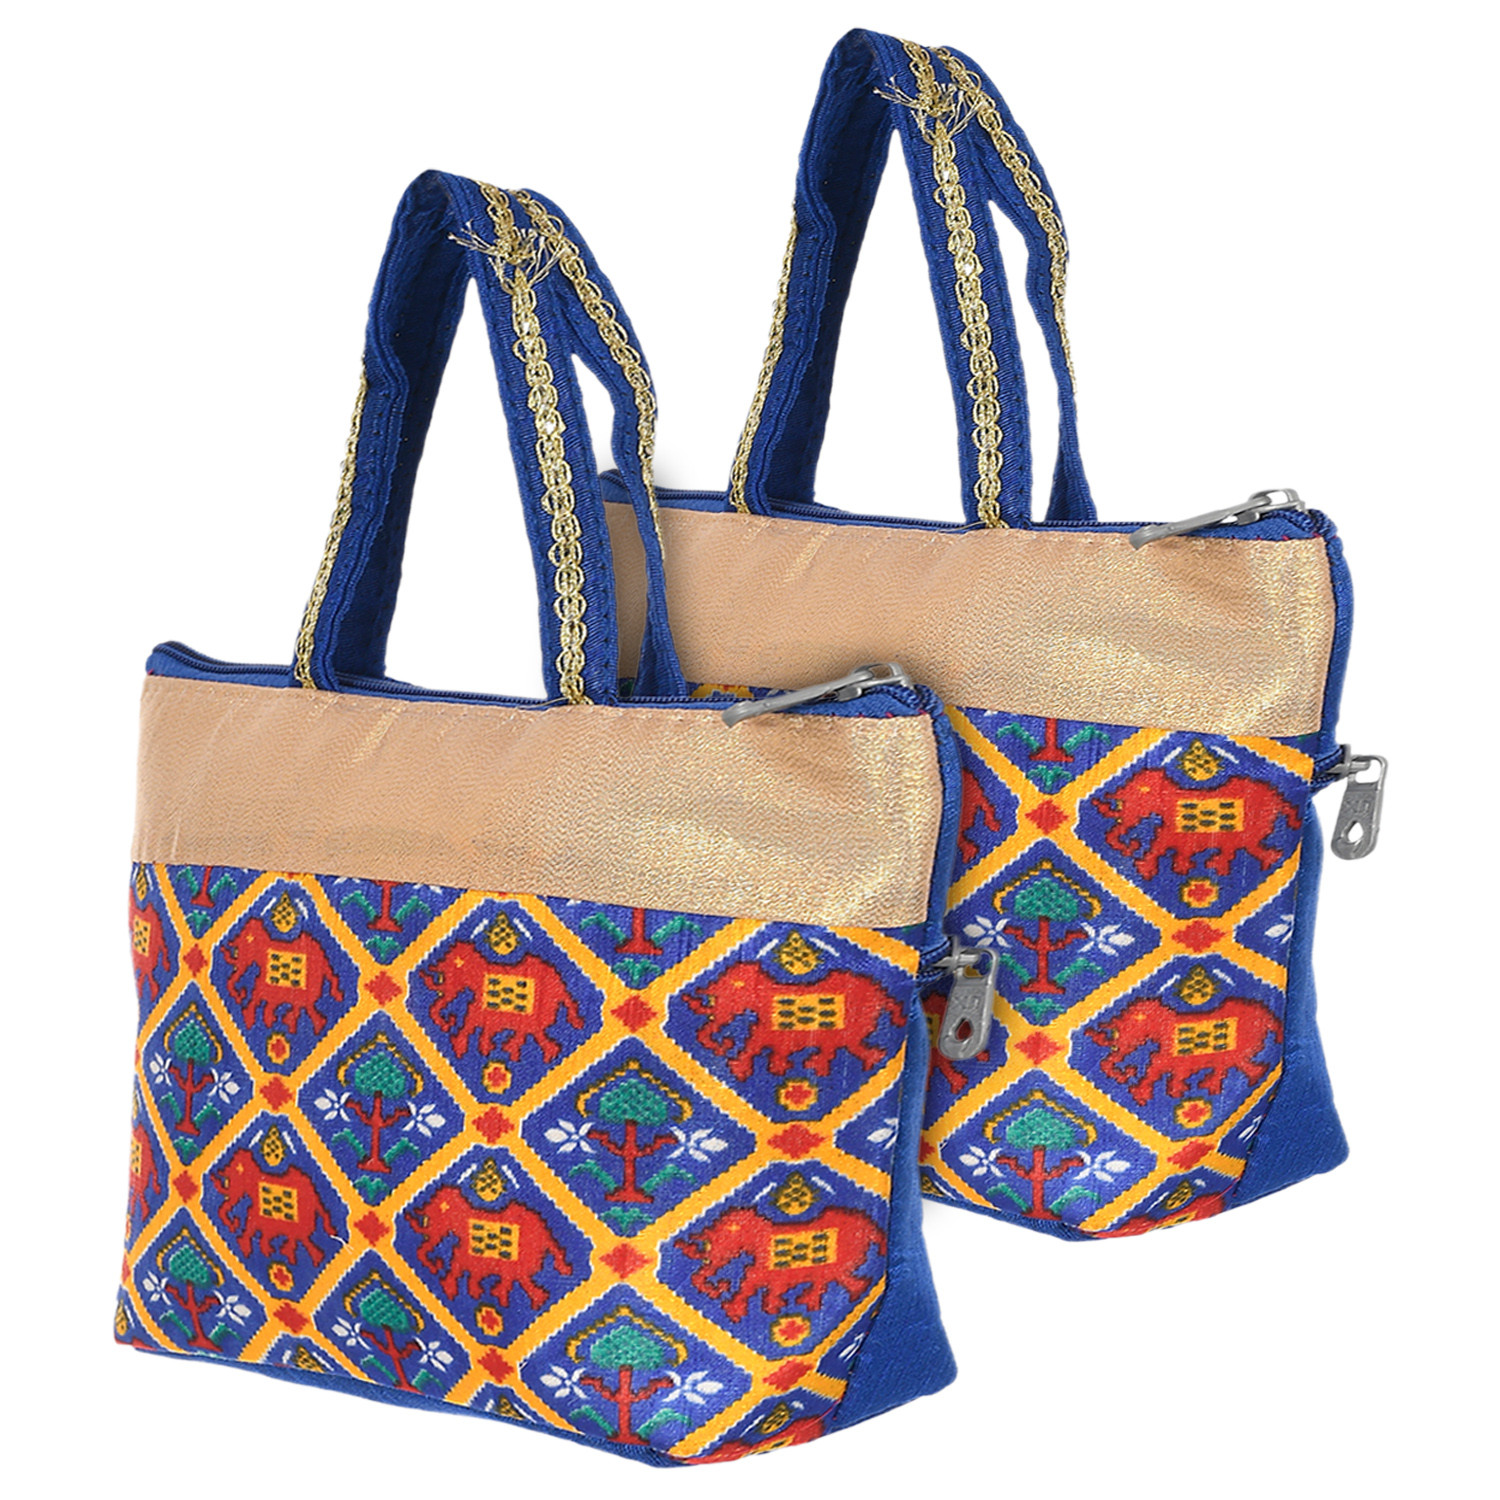 Kuber Industries Polyester Elephant Print Hand Bag For Women/Girls With Handle (Blue) 54KM4033